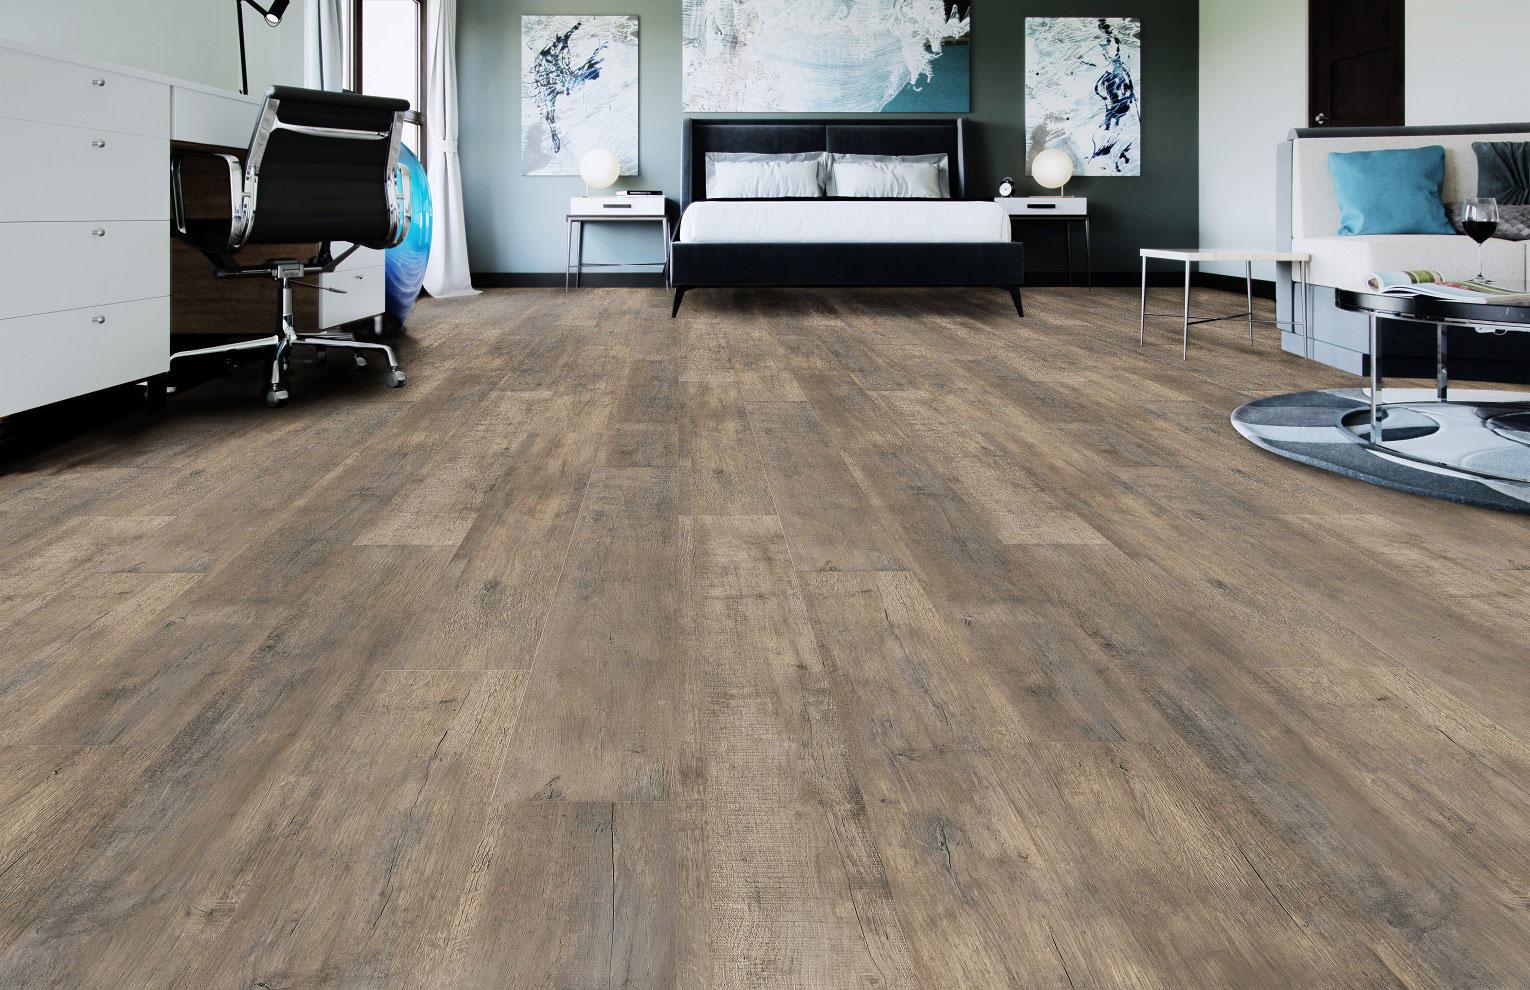 The Trends in Laminate line has been refreshed with two new water resistant collections!